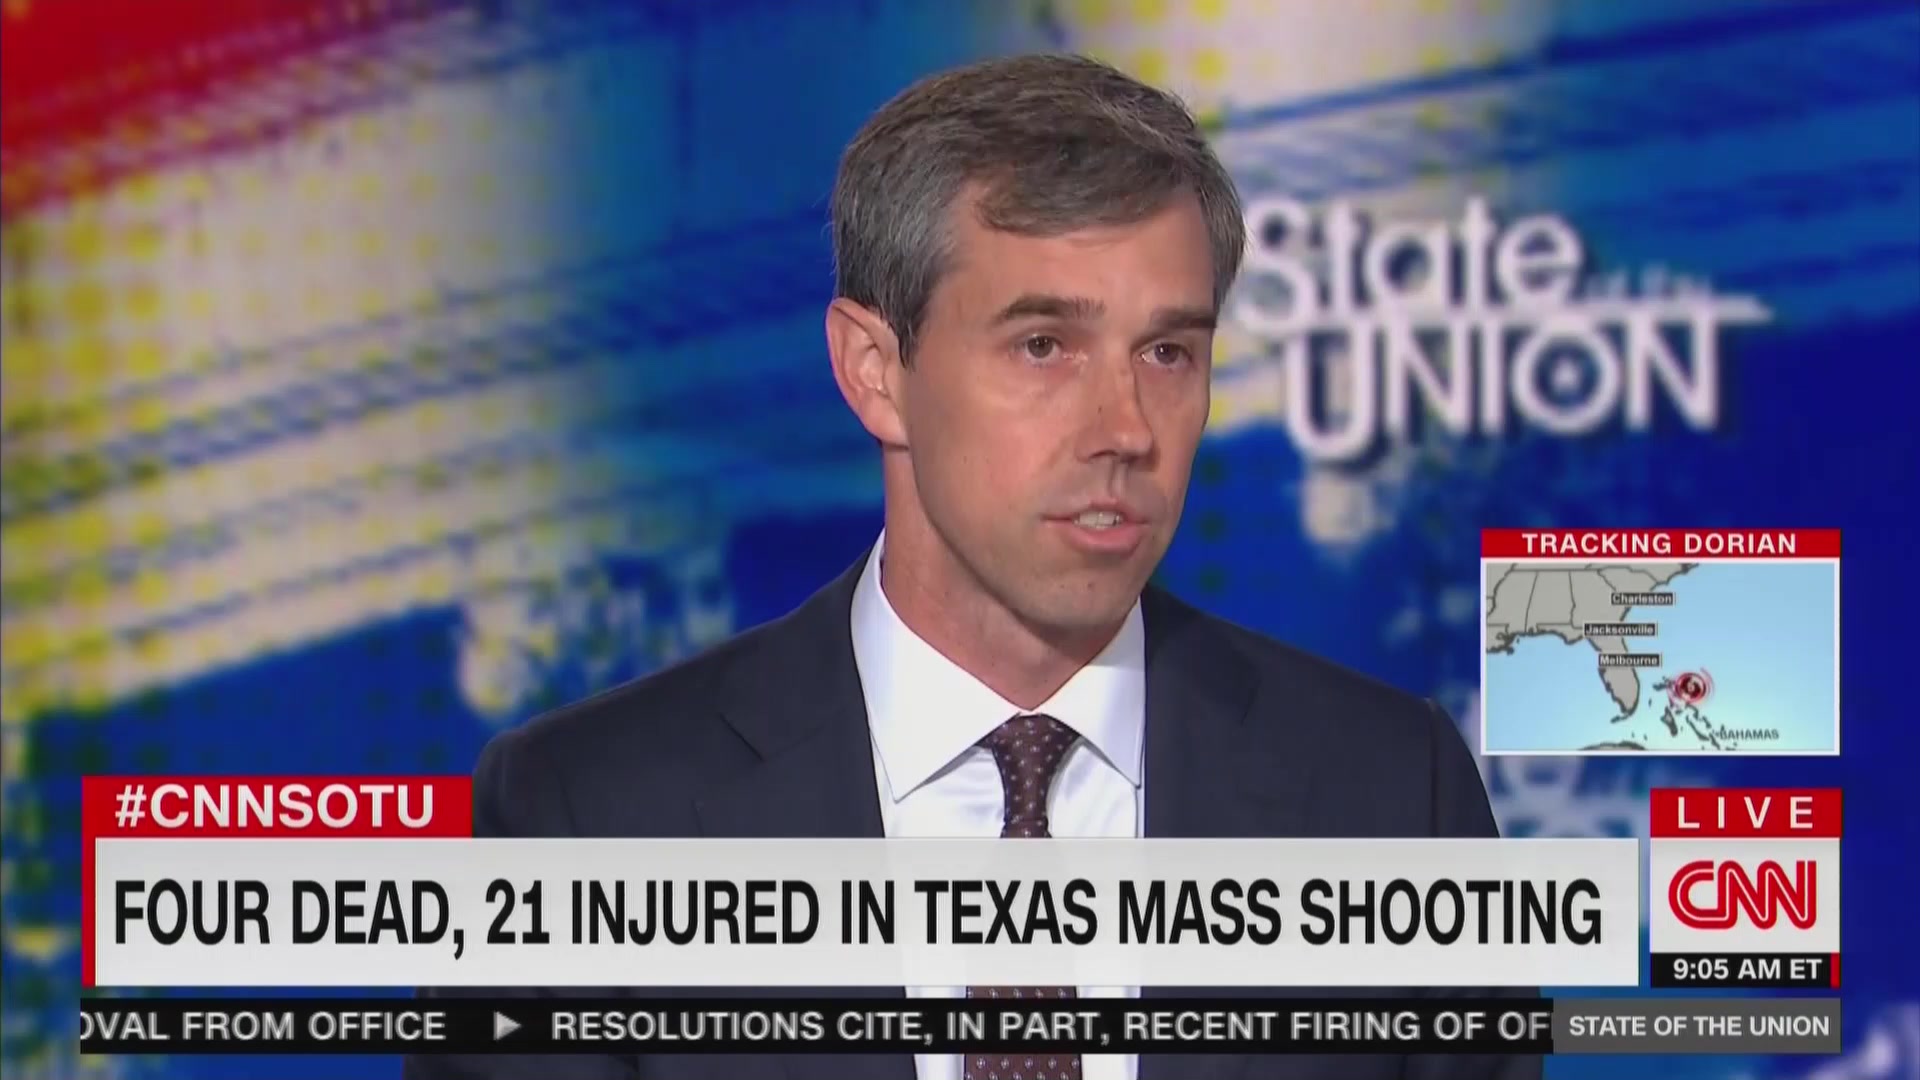 Beto O’Rourke Drops F-Bomb Live on CNN Over Odessa Shooting: ‘This Is F*cked Up!’